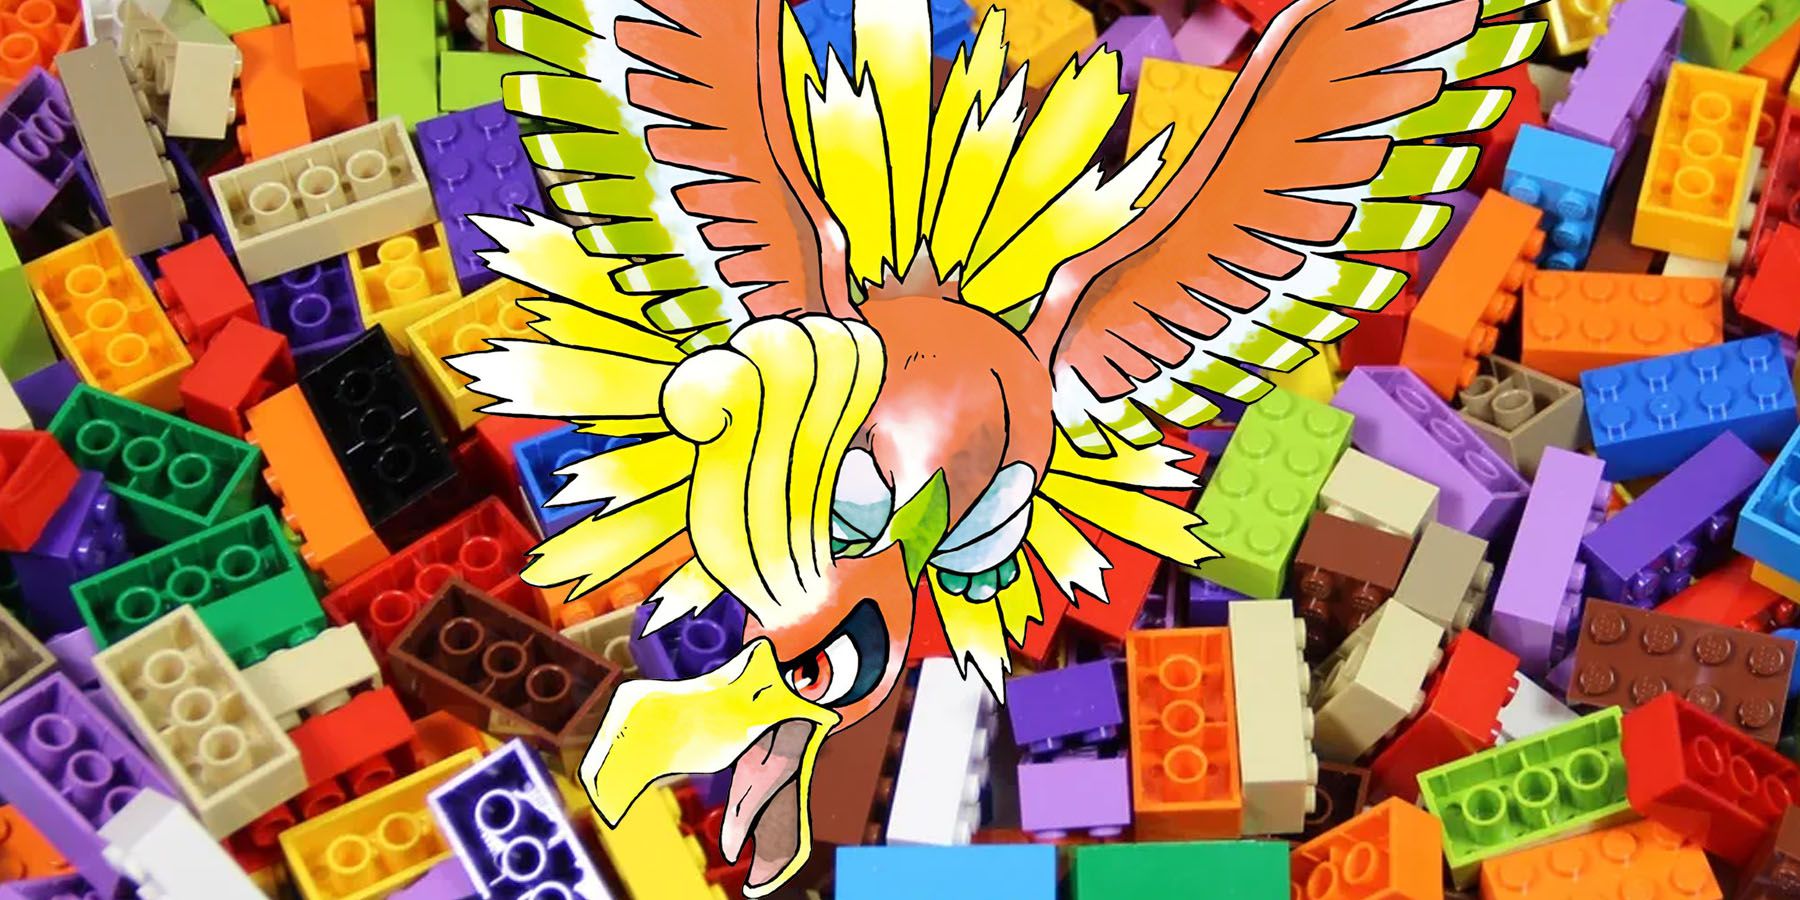 An image of Pokemon Gold's Ho-Oh placed in front of a pile of LEGO bricks.